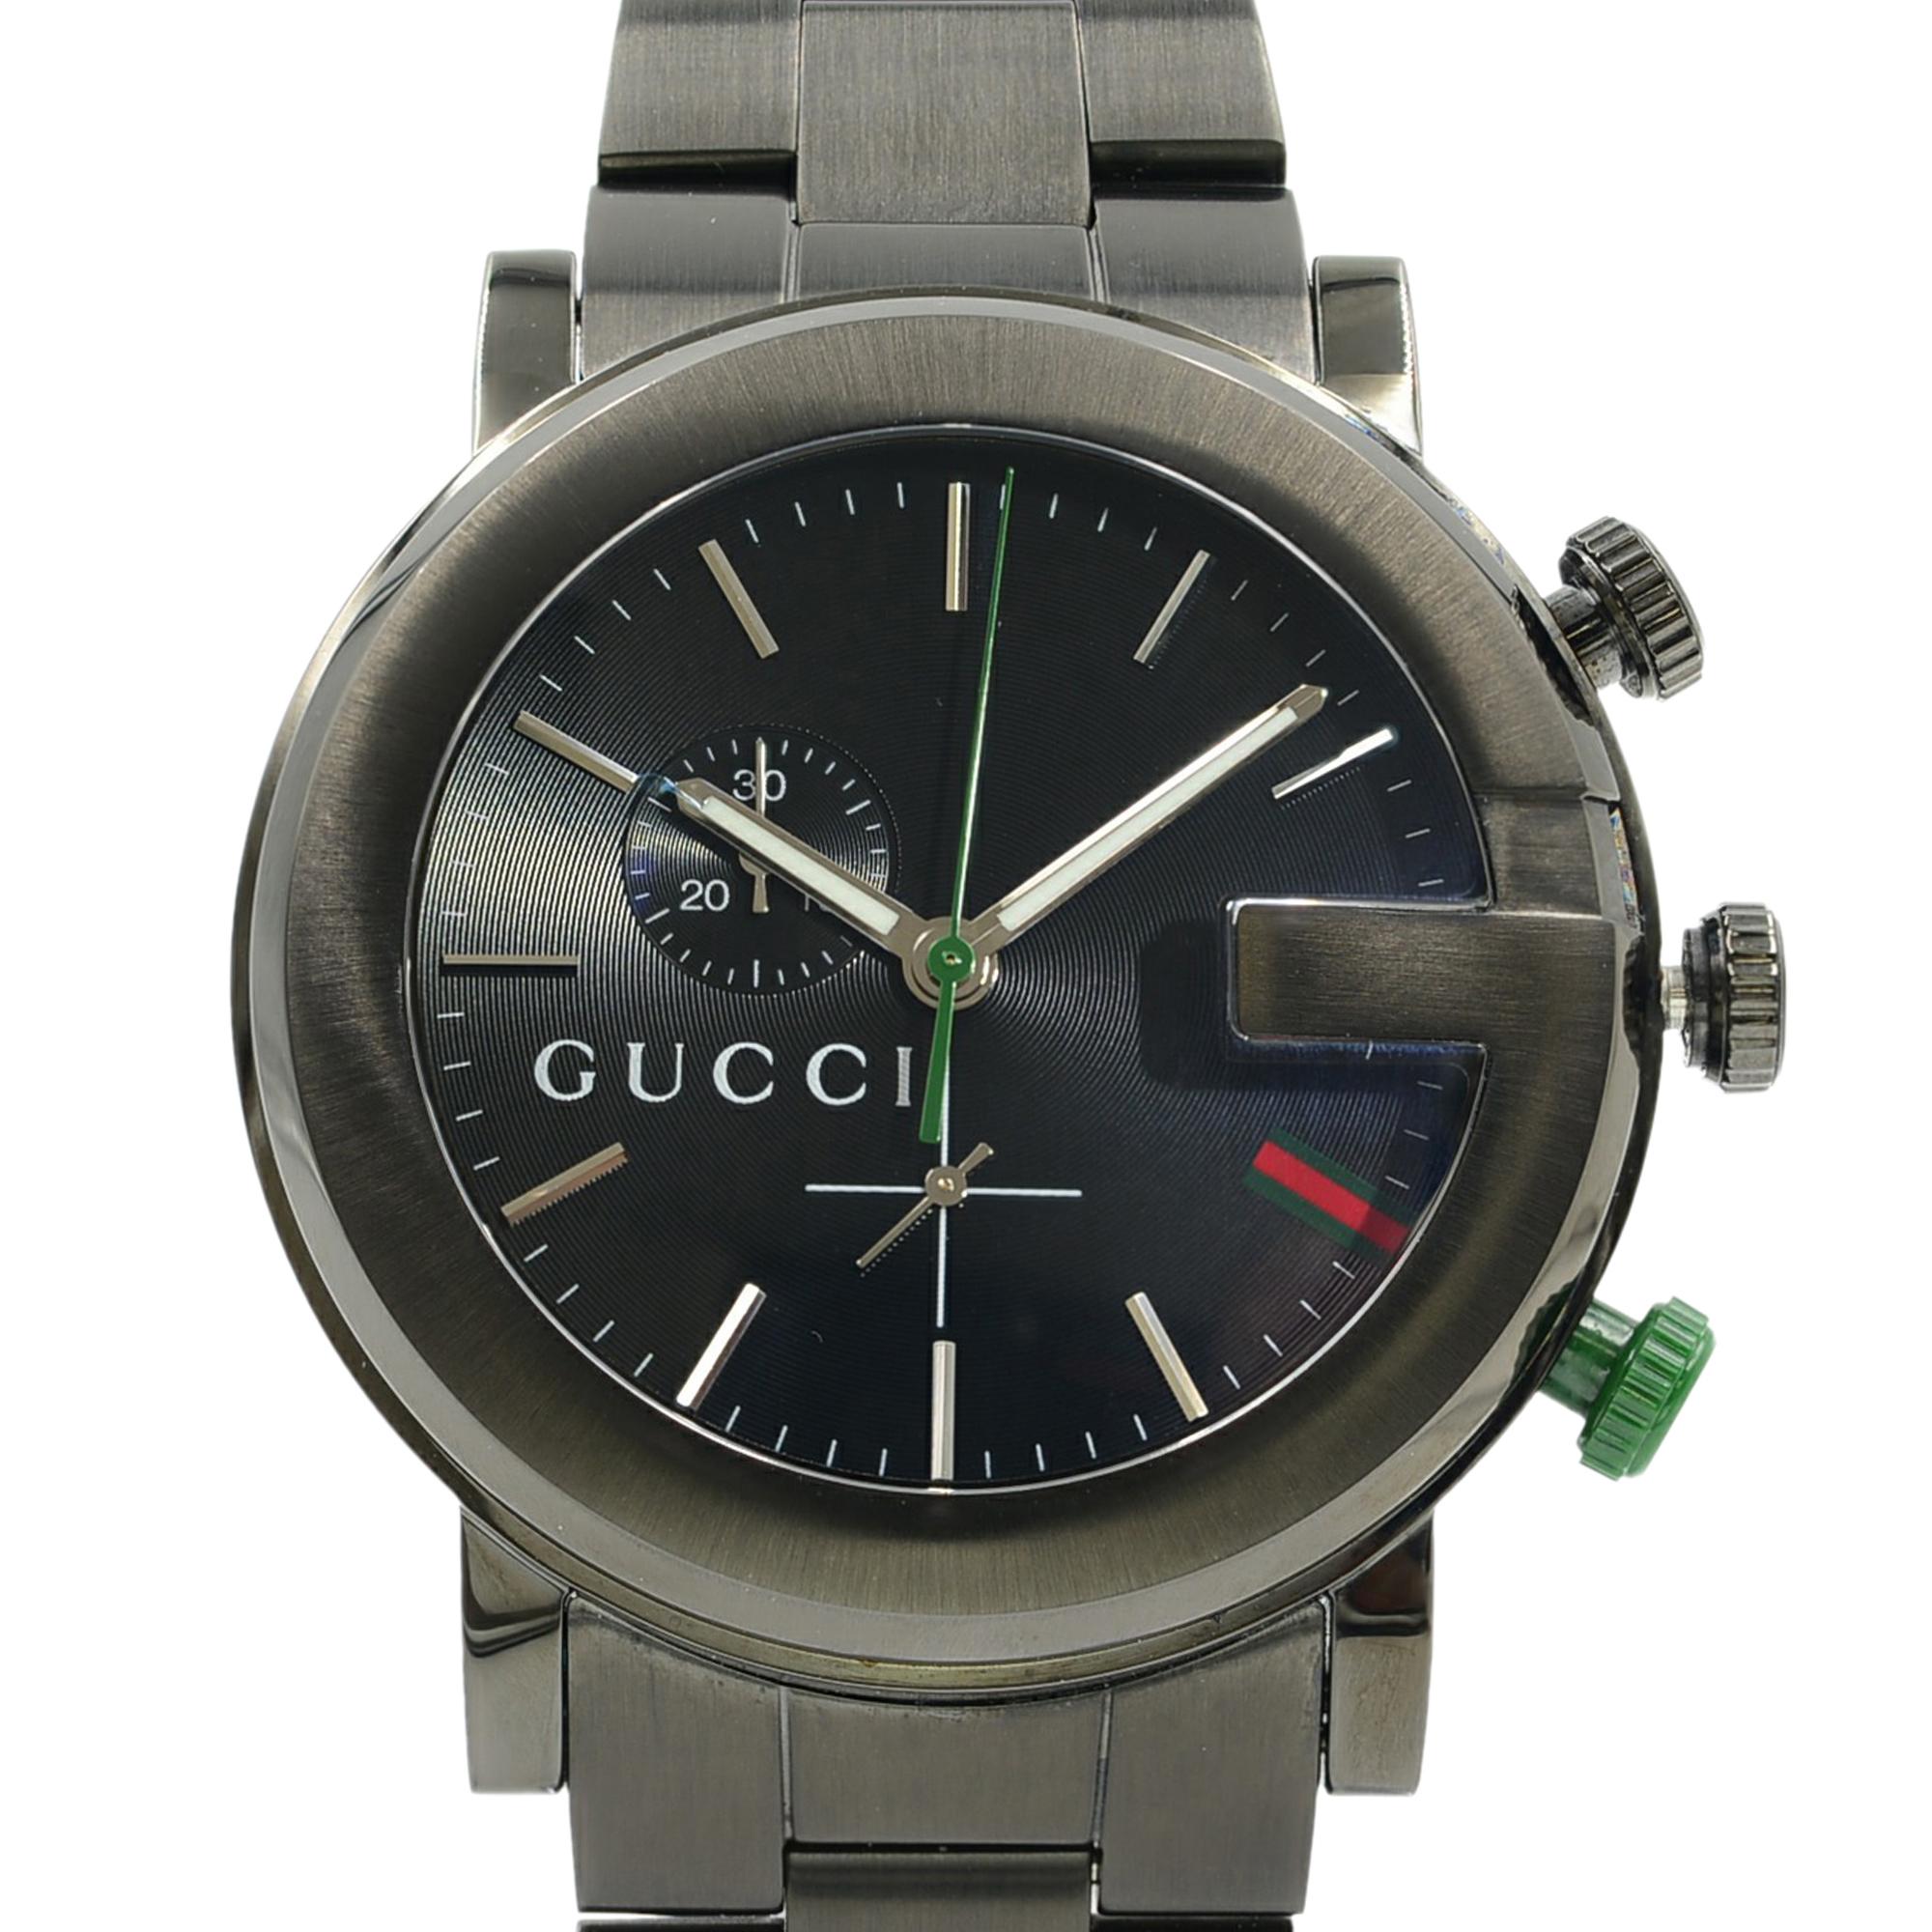 This pre-owned Gucci G-Chrono YA101331 is a beautiful men's timepiece that is powered by quartz (battery) movement which is cased in a stainless steel case. It has a round shape face, chronograph, date indicator, small seconds subdial dial and has